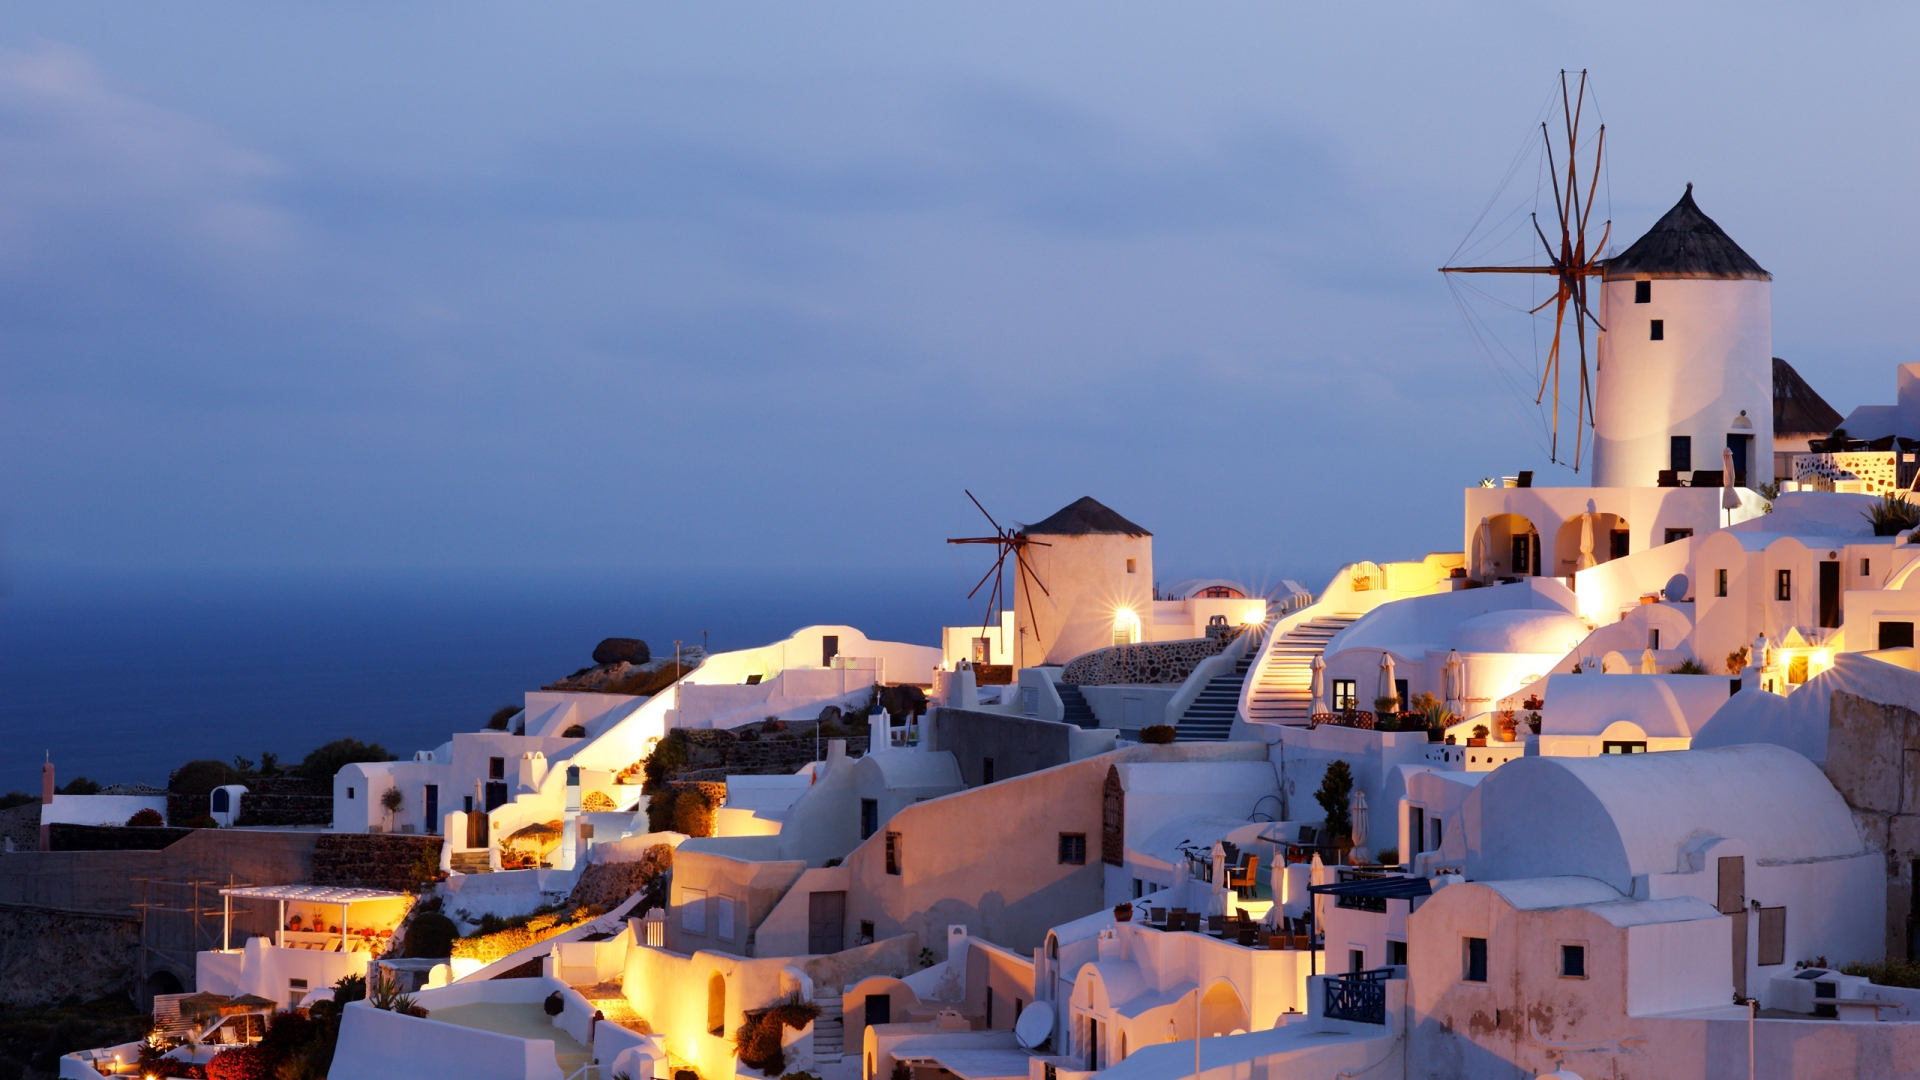 Oia Castle for 1920 x 1080 HDTV 1080p resolution